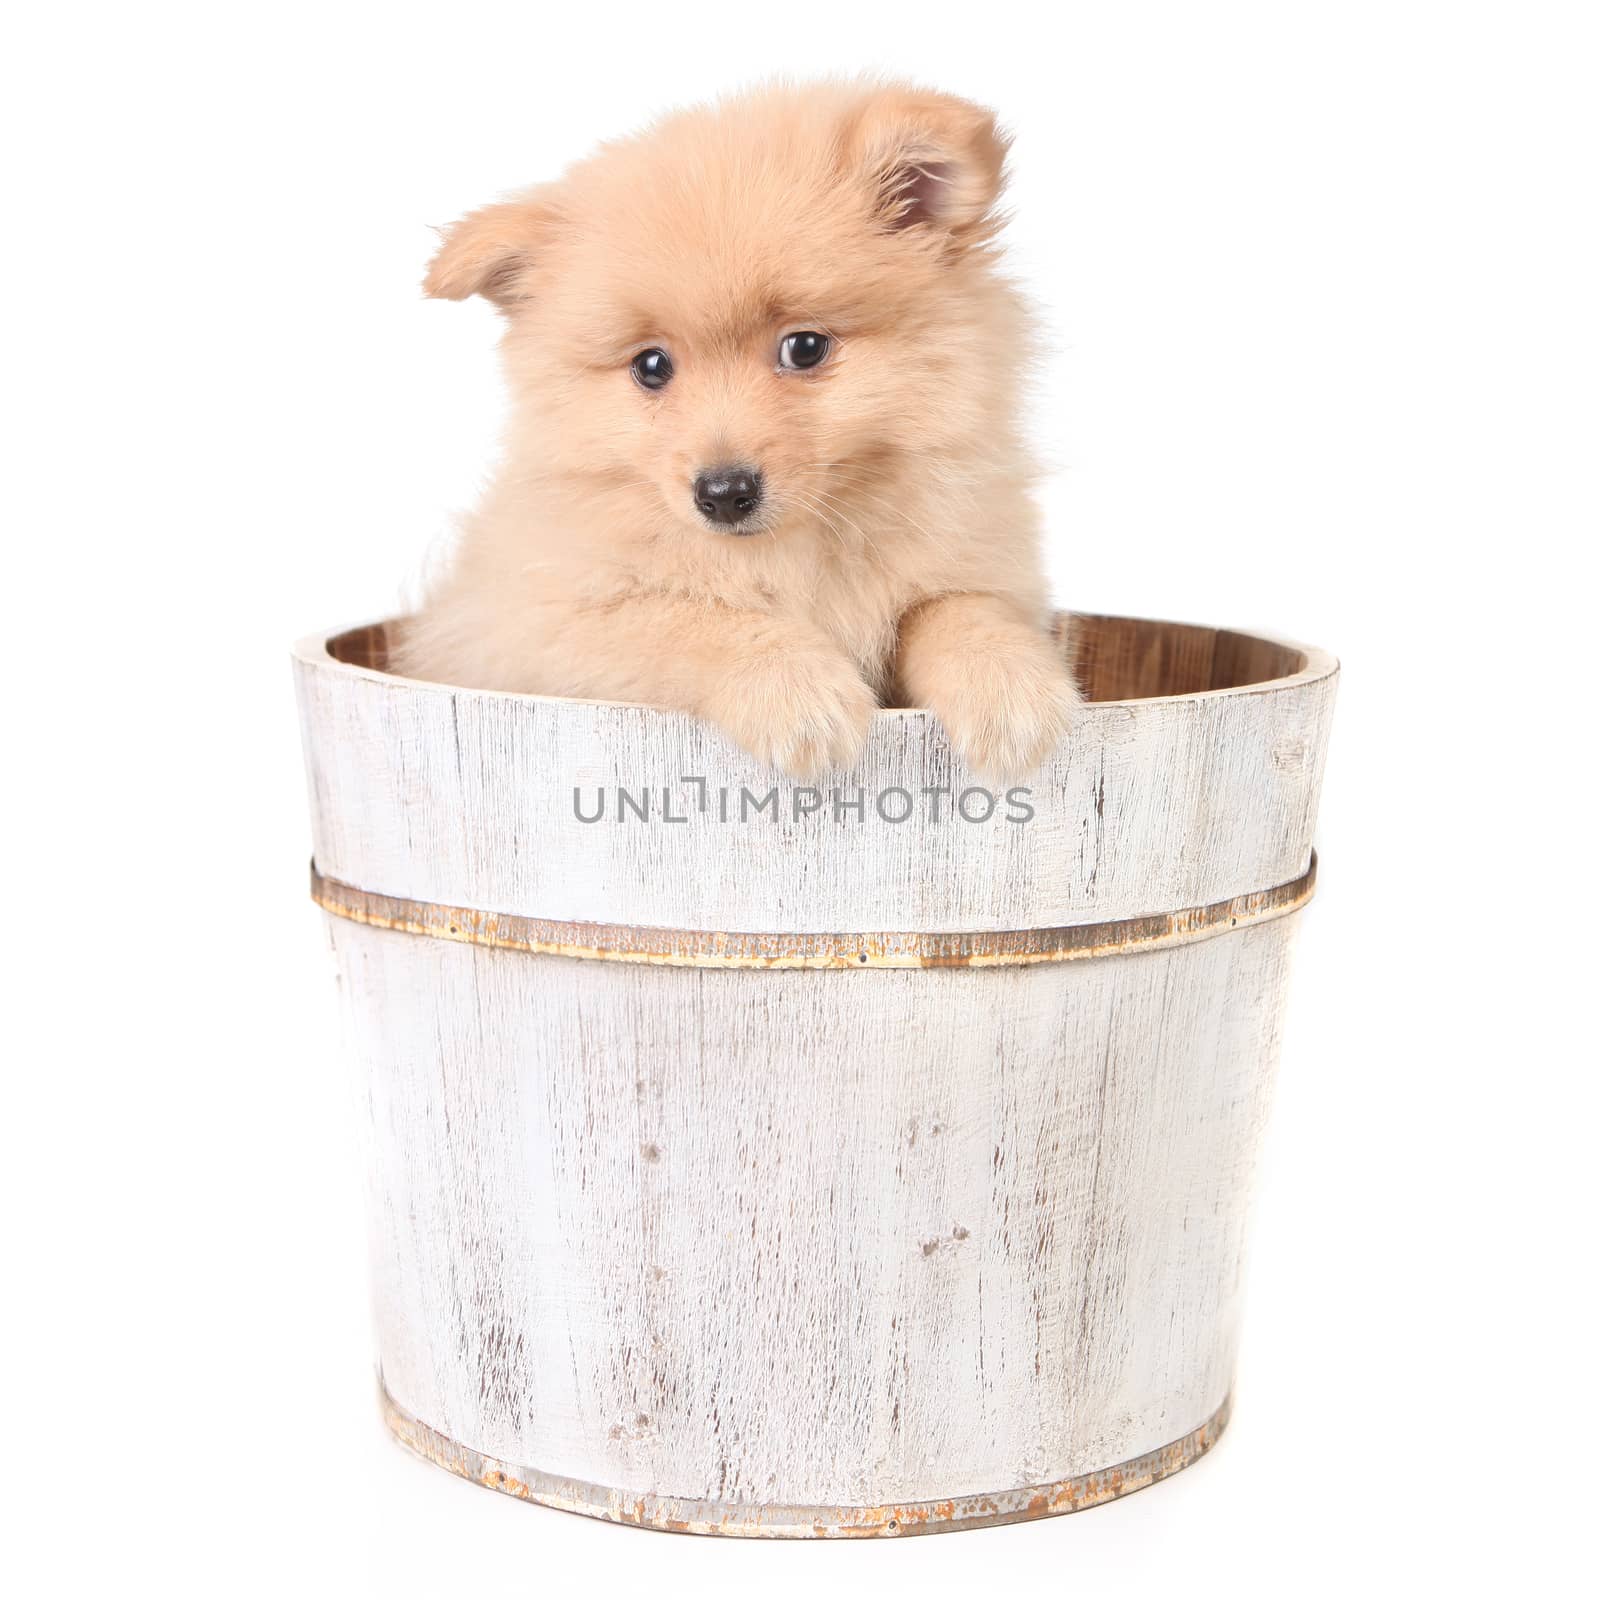 Timid Puppy in a Barrel Looking Curiously  by tobkatrina